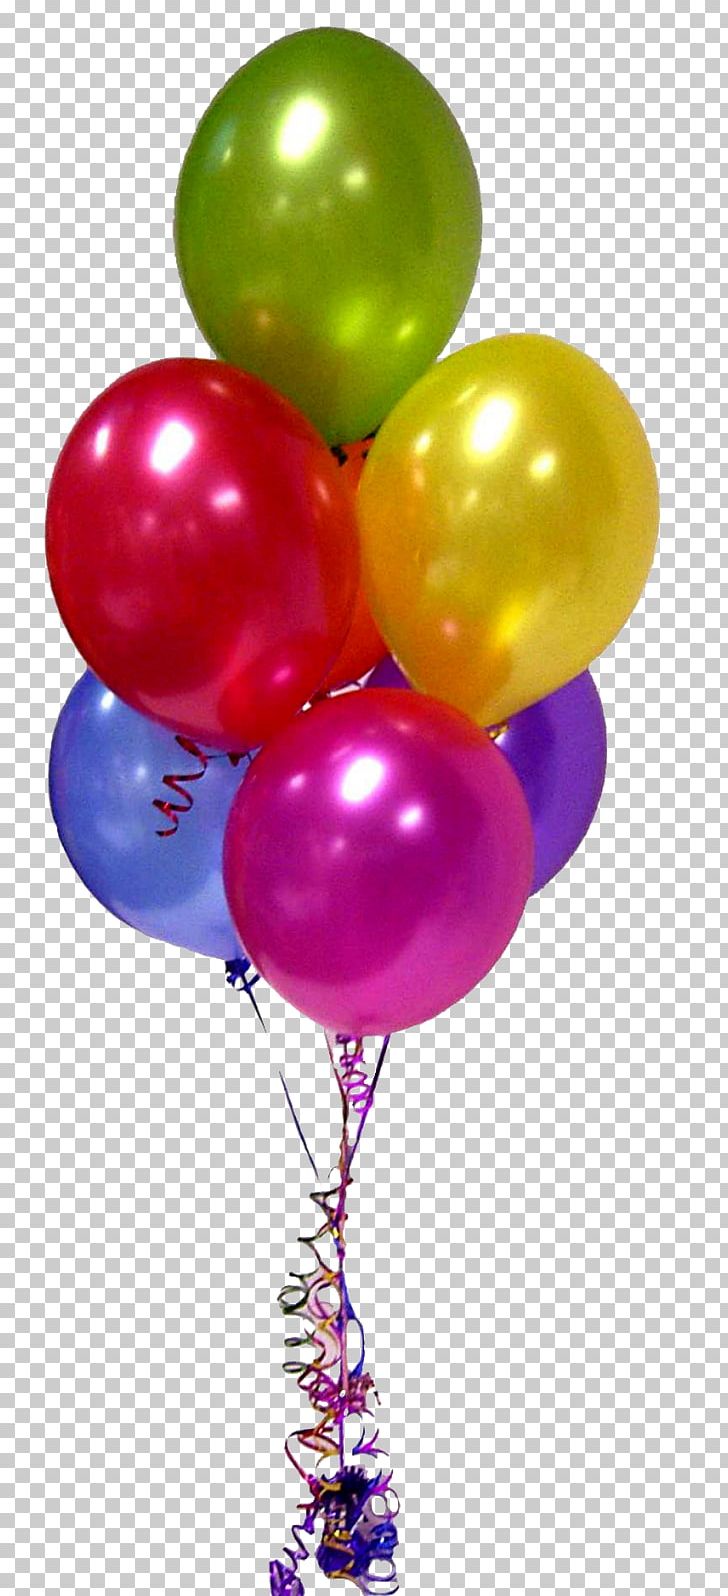 Gas Balloon Helium Flower Bouquet Party PNG, Clipart, Balloon, Balloons, Birthday, Centrepiece, Childrens Party Free PNG Download